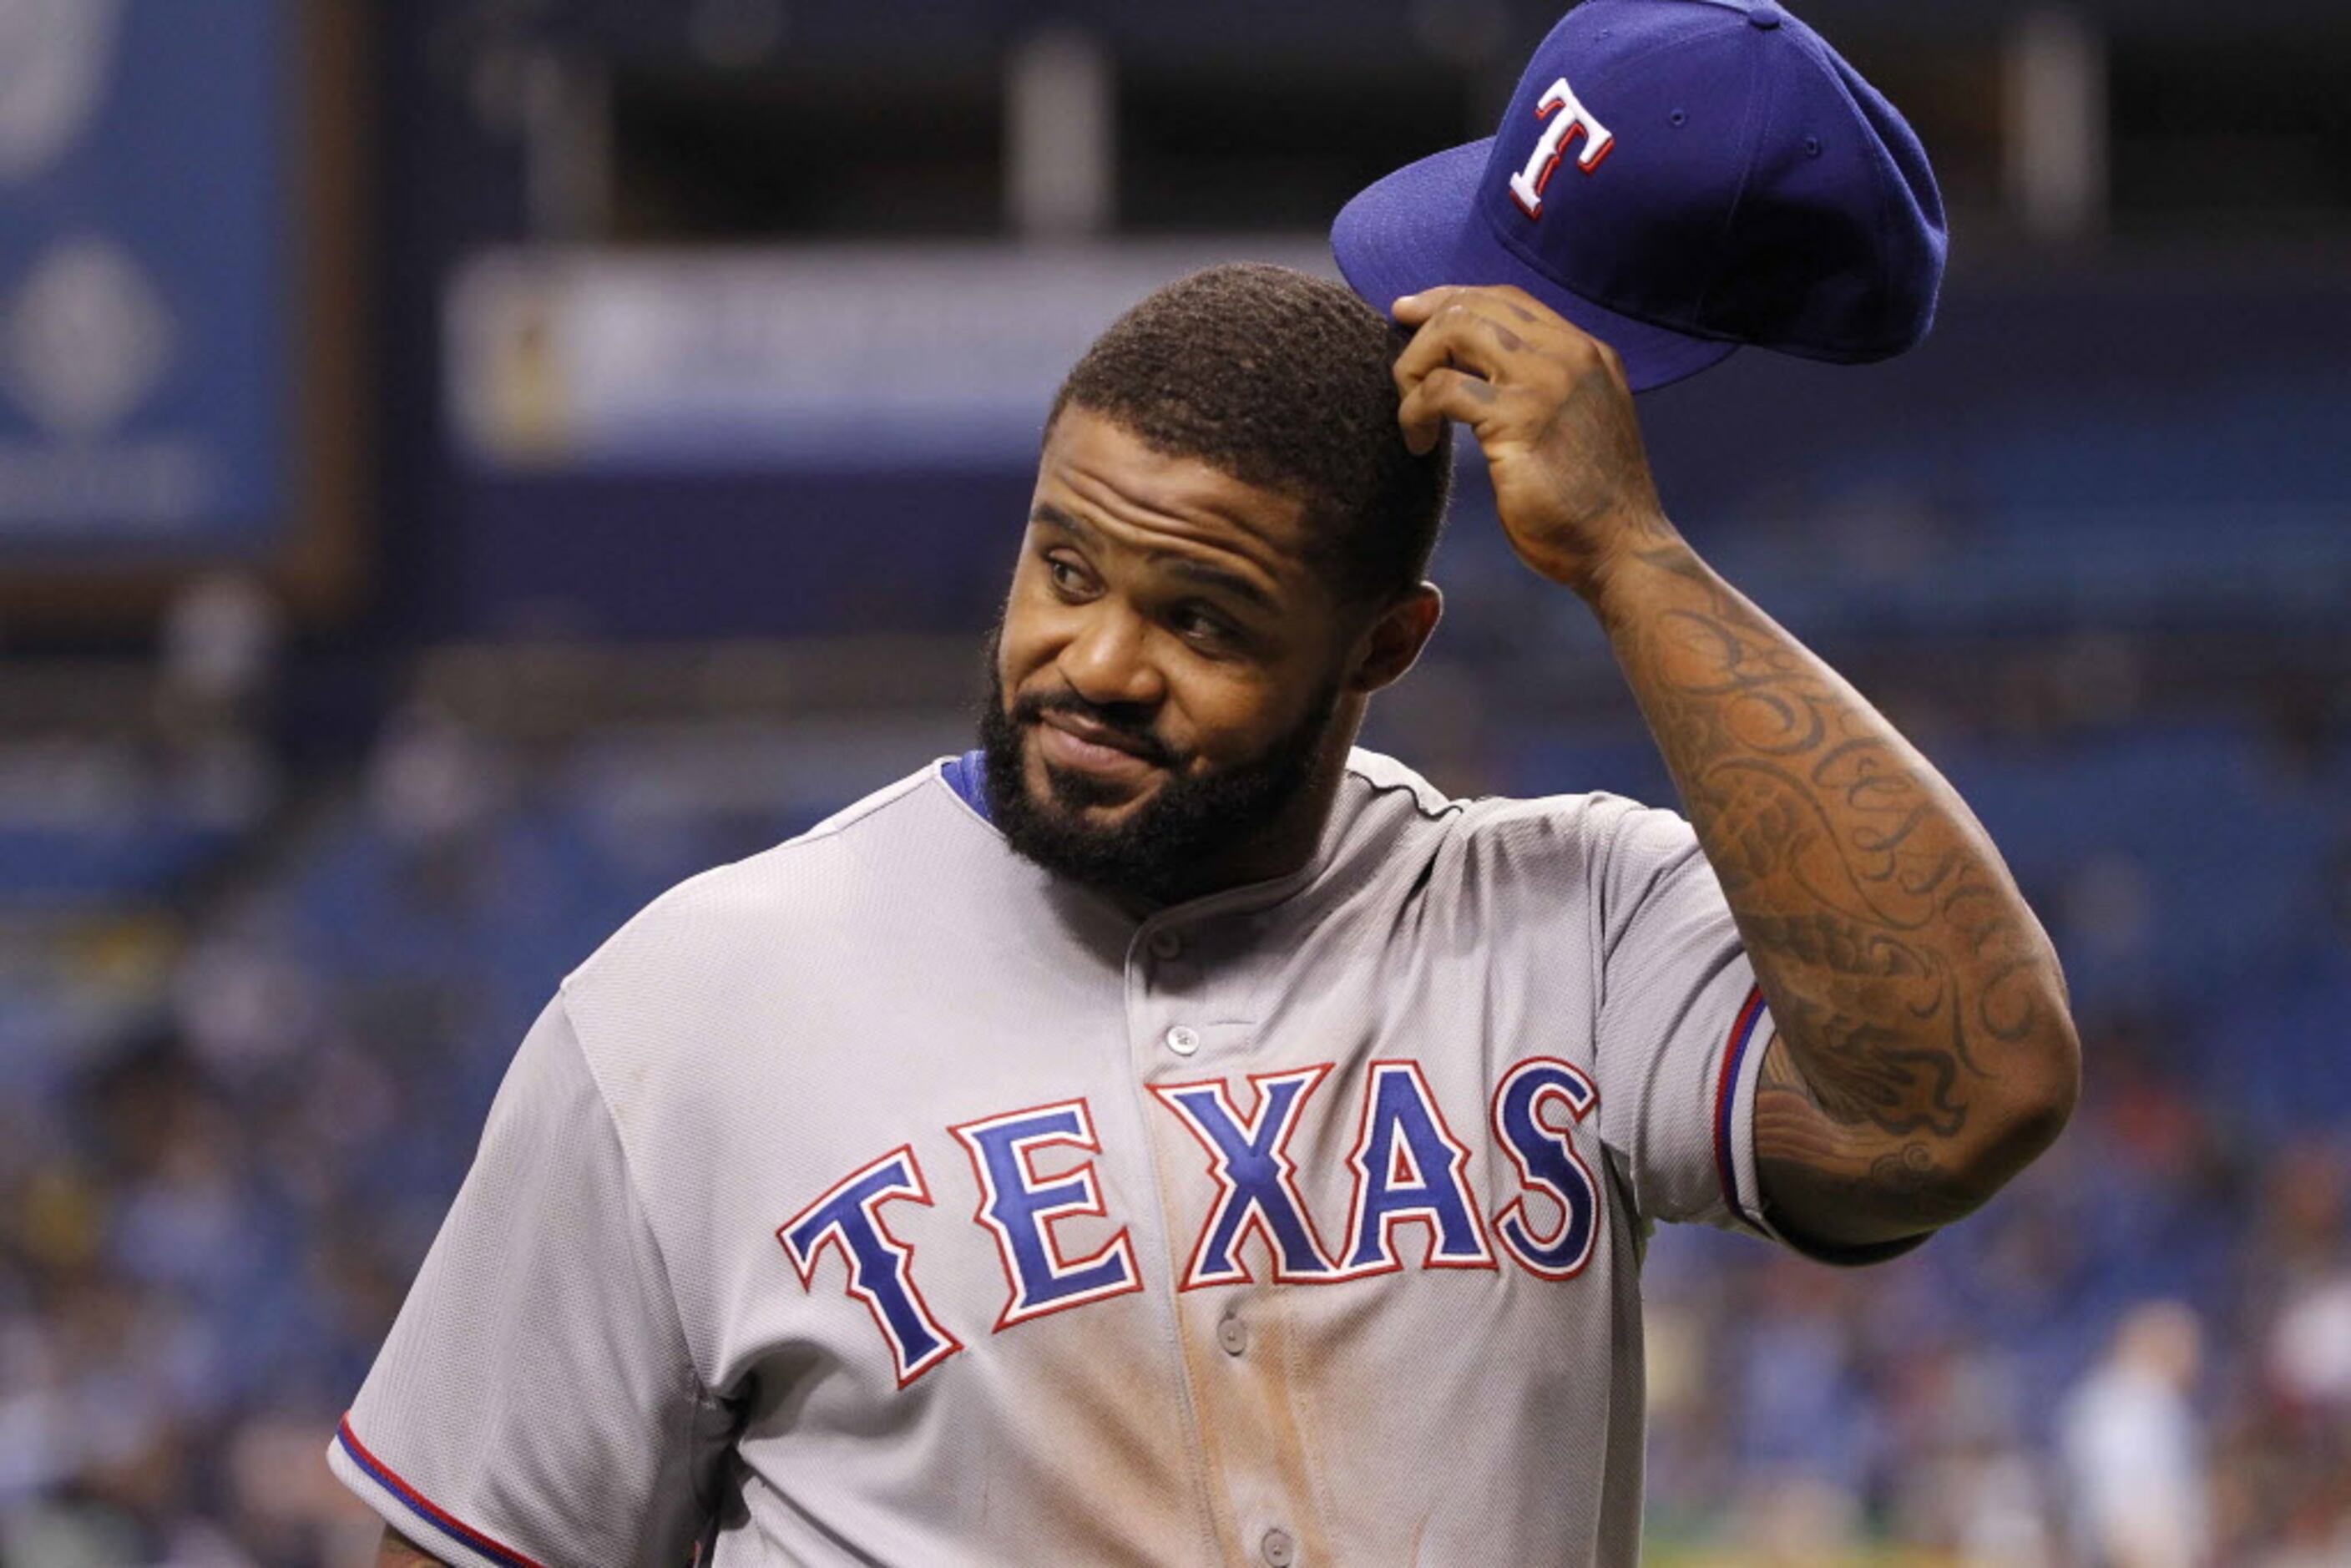 Prince Fielder Archives - Page 14 of 429 - MLB